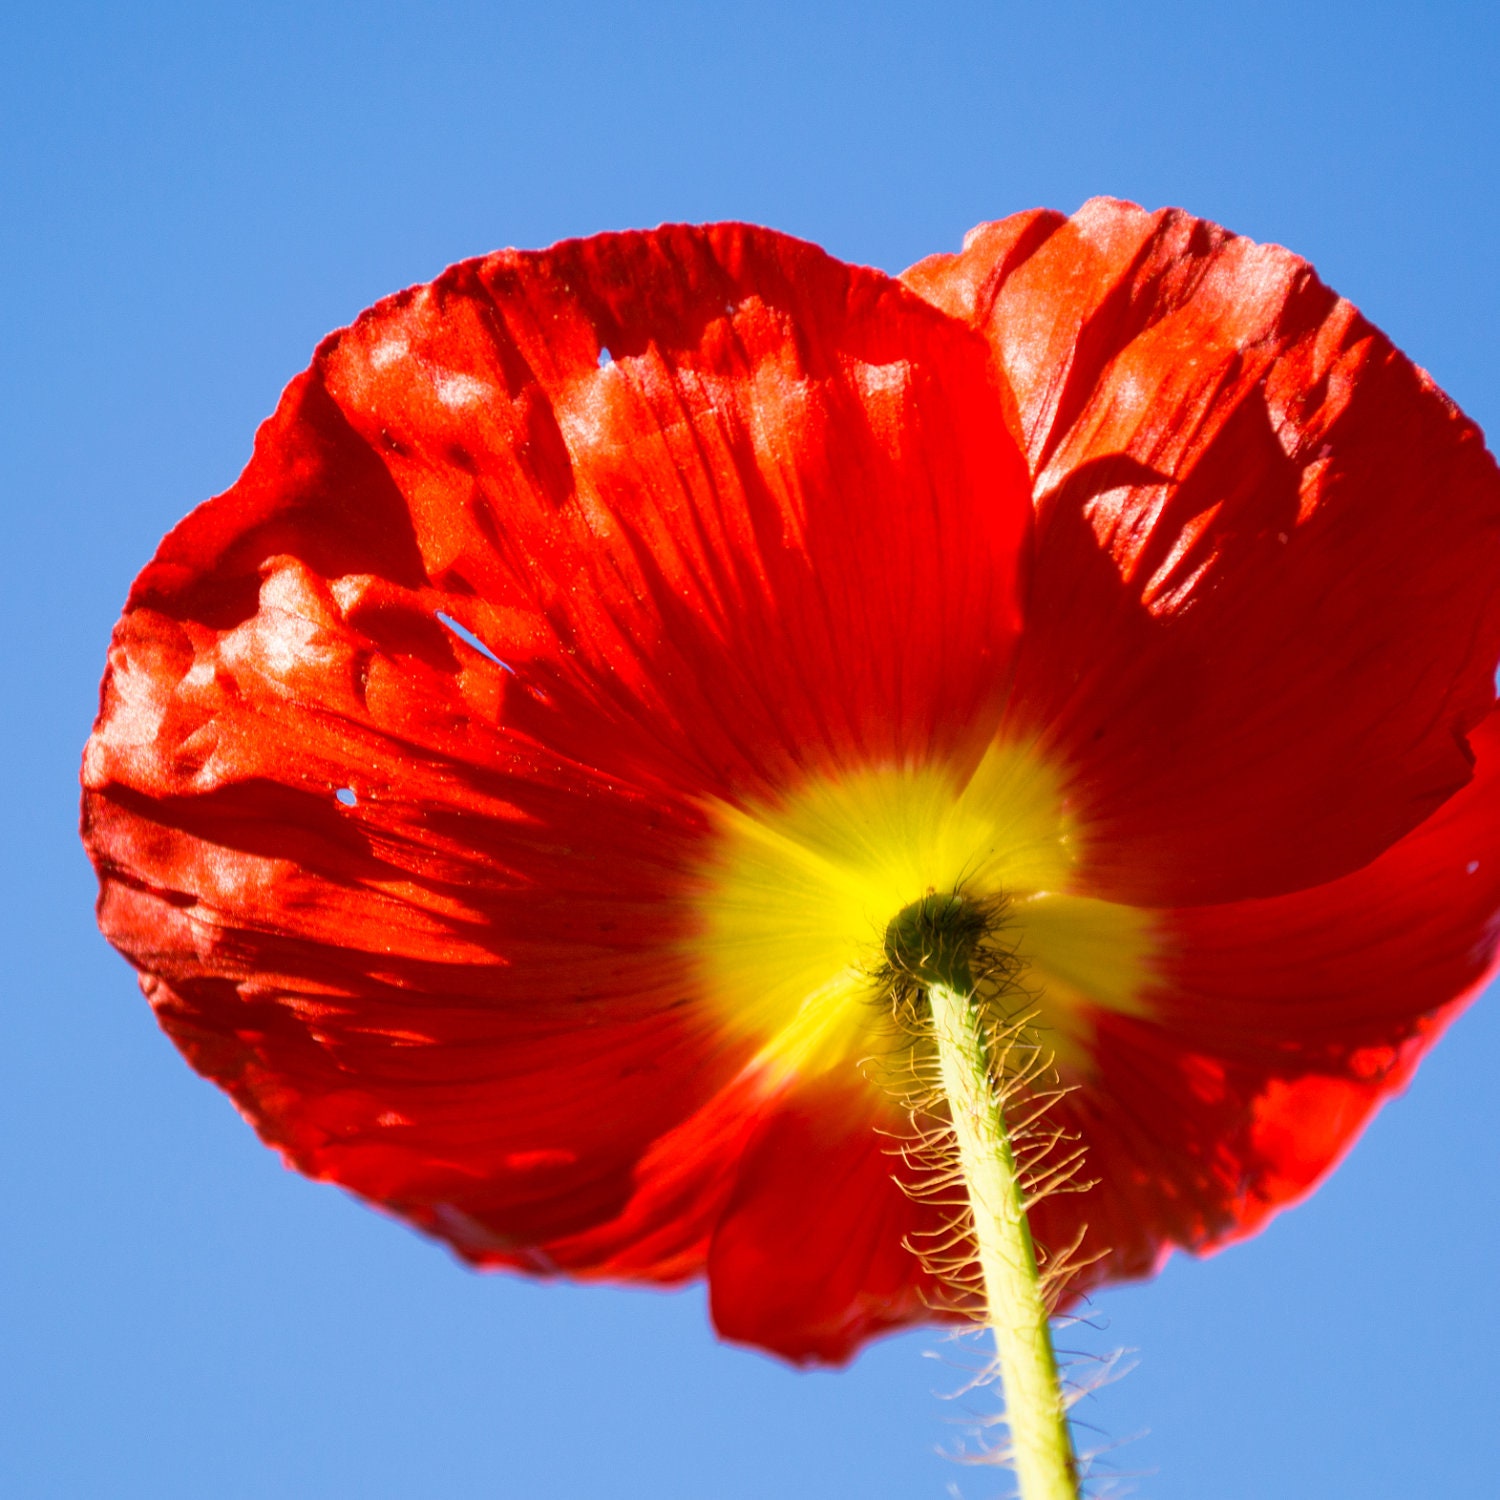 Red Poppy and Sky 10x10 Fine Art Photography Print - charitykittler